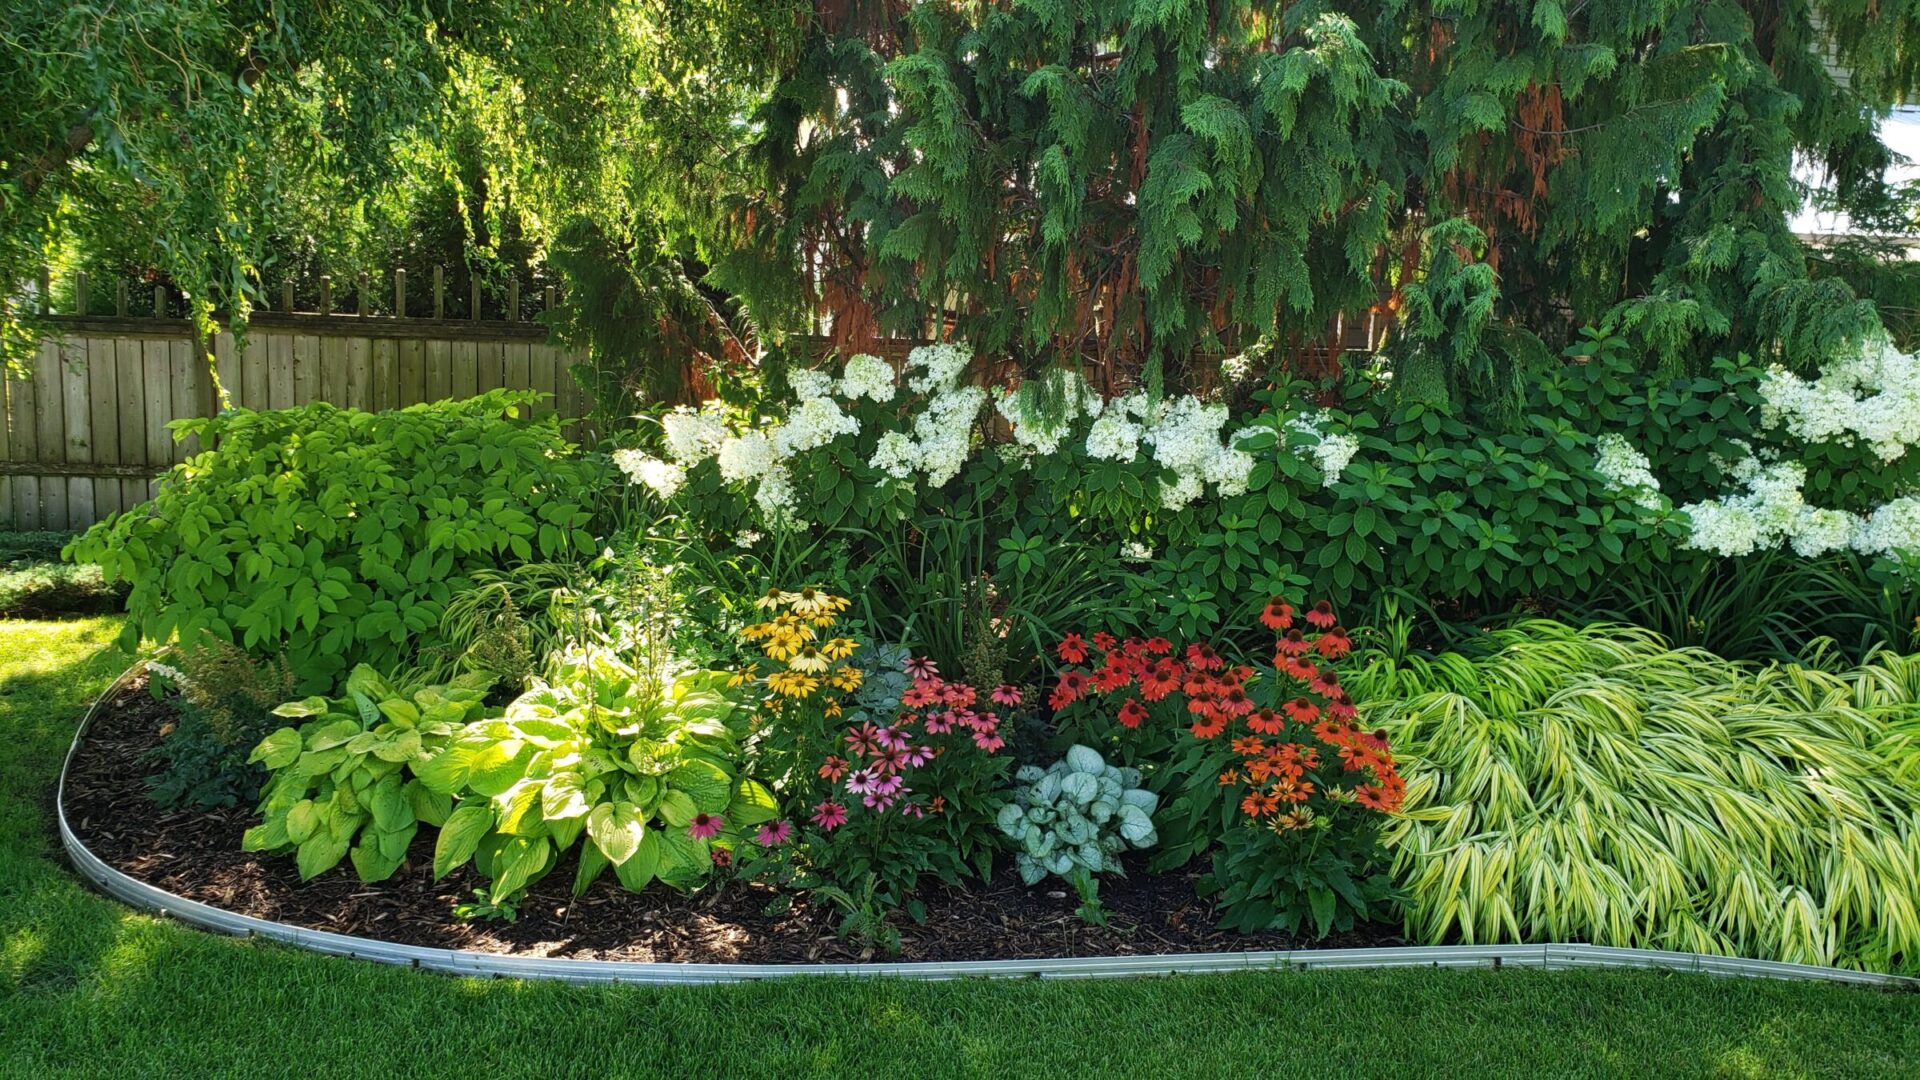 Lush garden with vibrant flowers and shrubs against a fence, under weeping trees. Varied textures and colors create a serene, well-tended landscape.